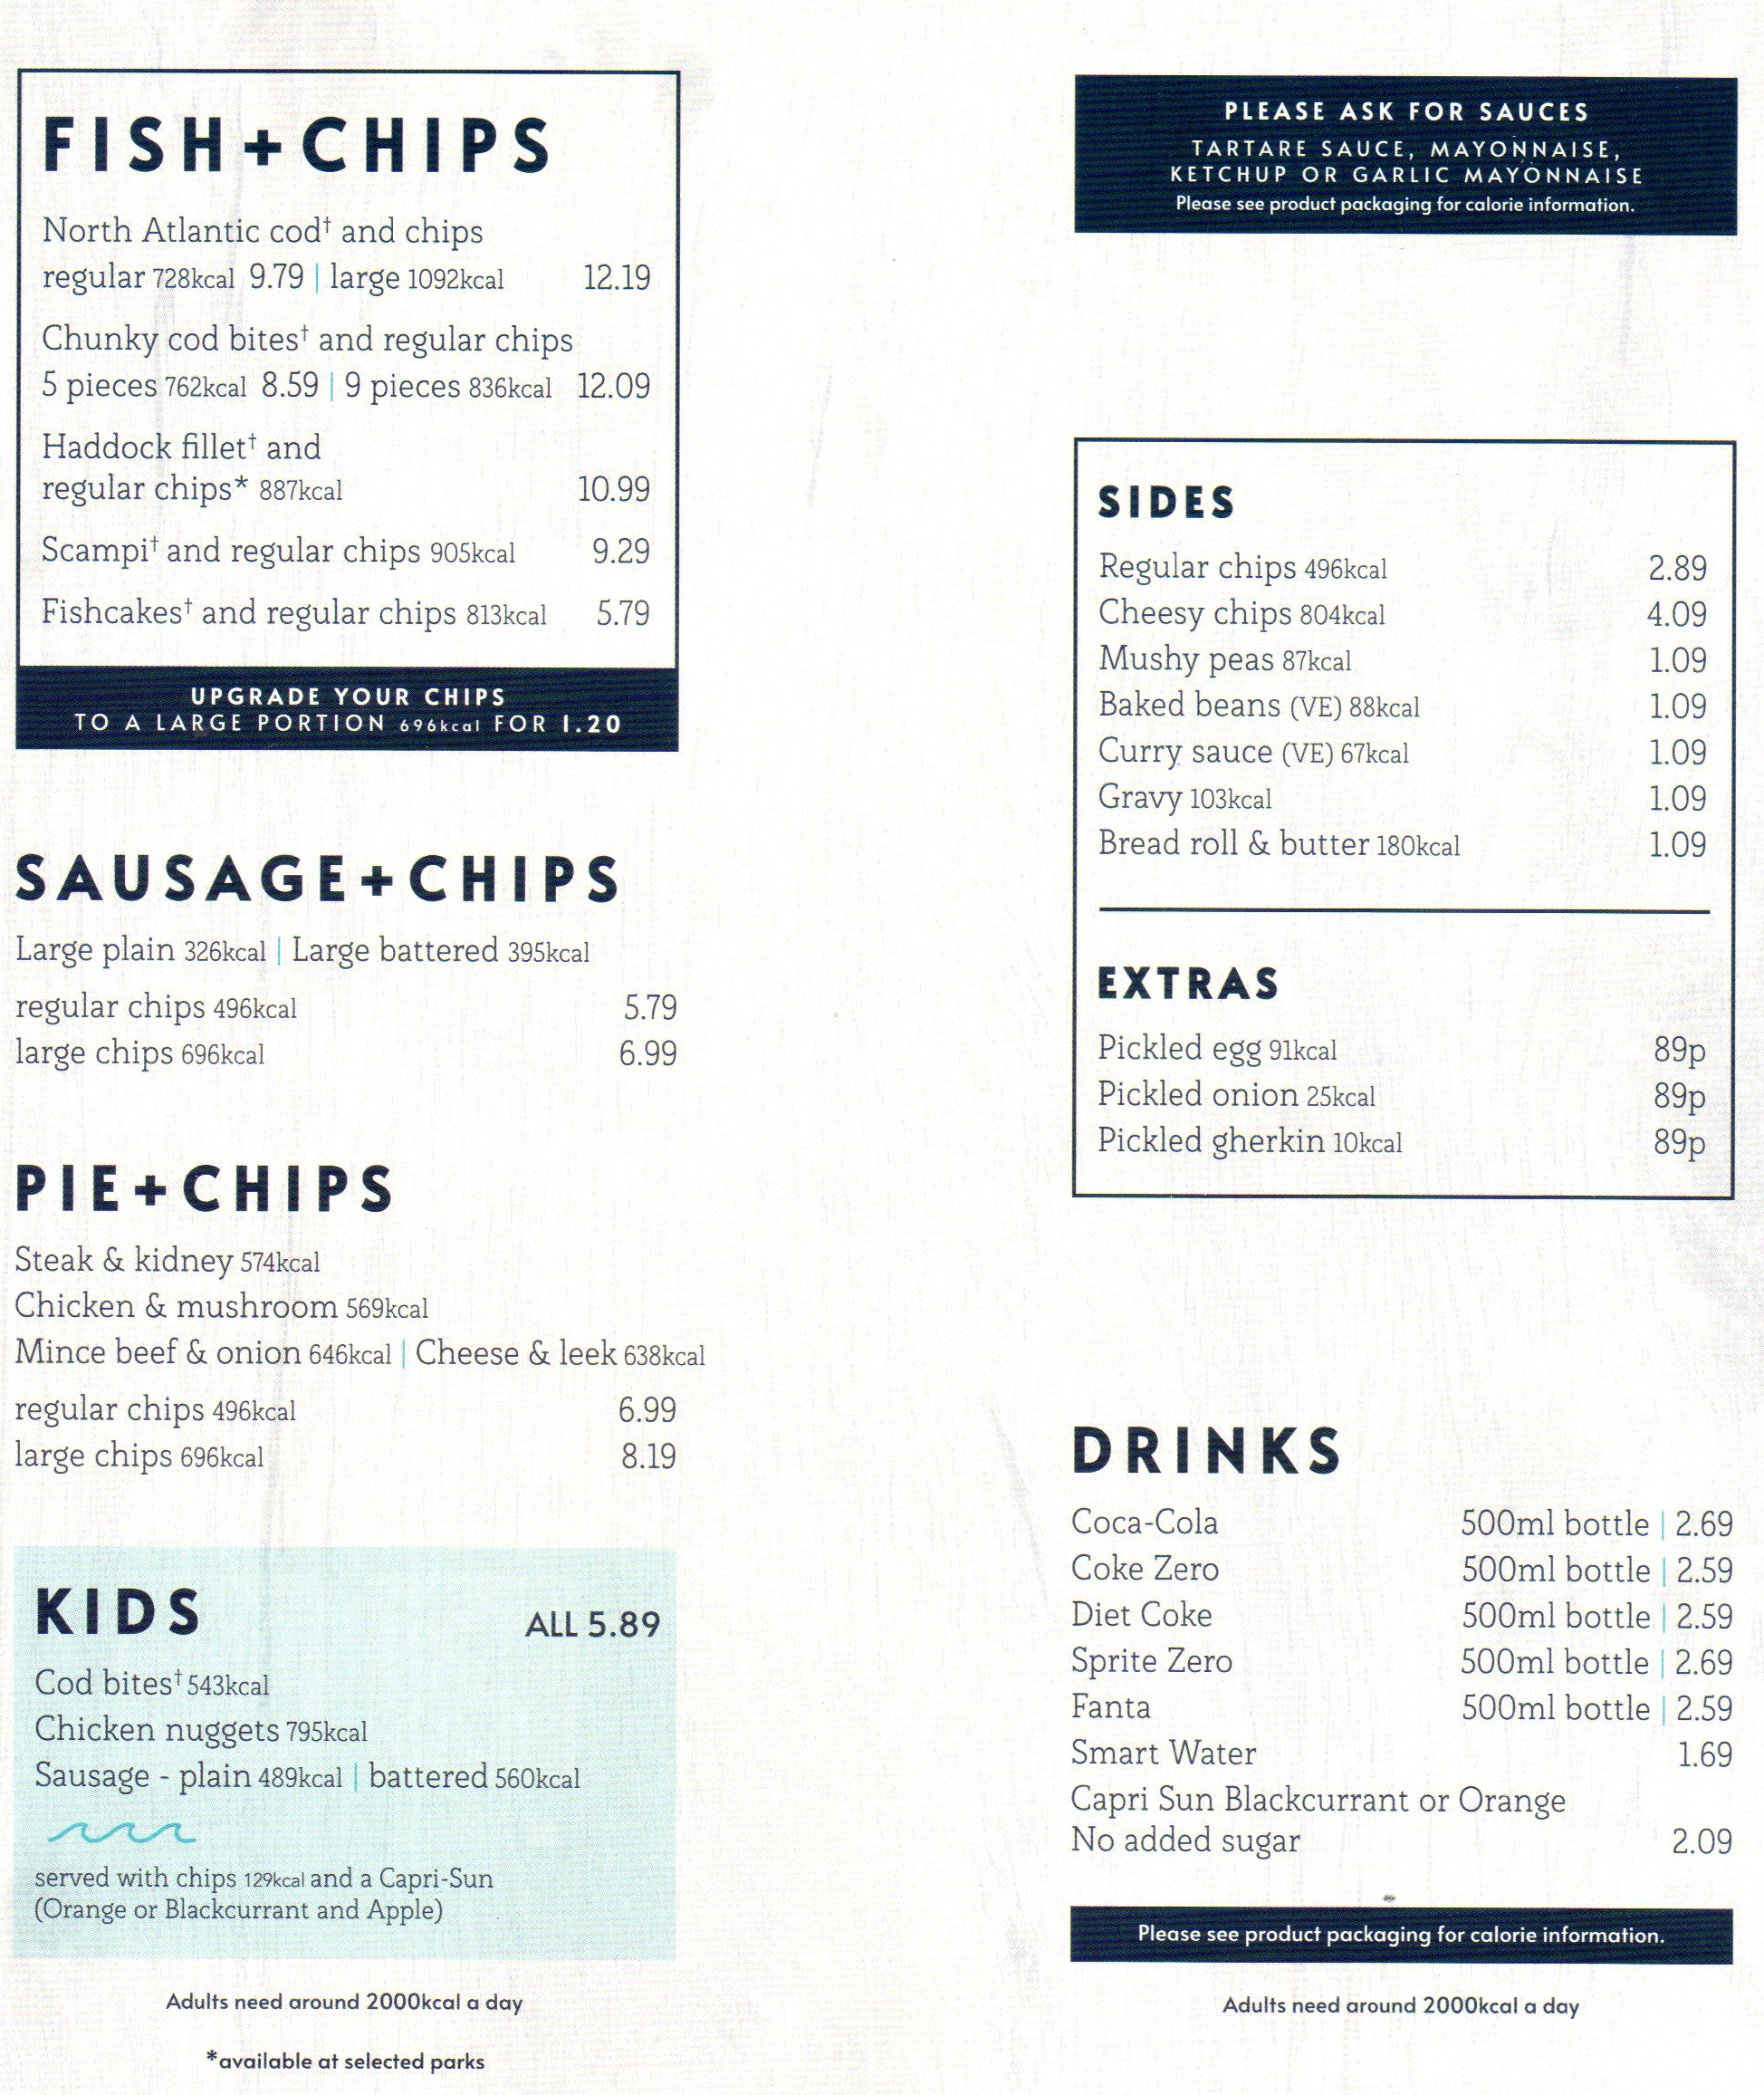 Cook's Seaside Fish and Chips Menu